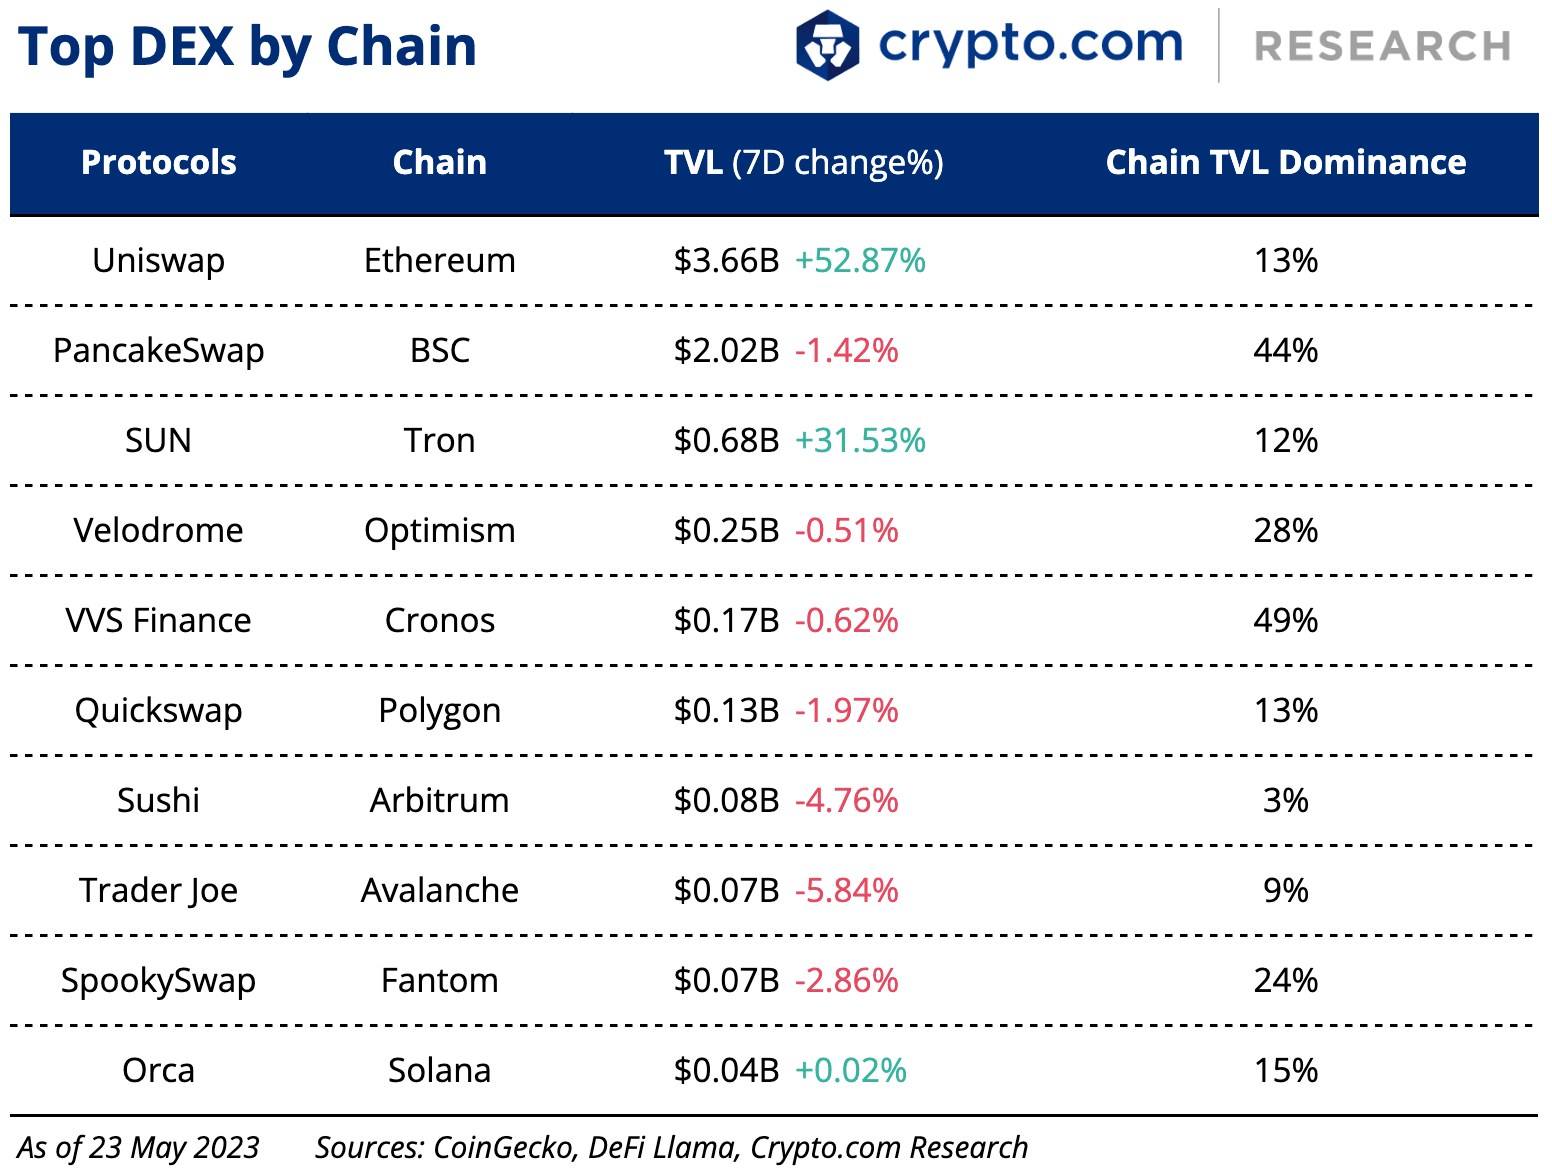 Top DEX by Chain 24 May